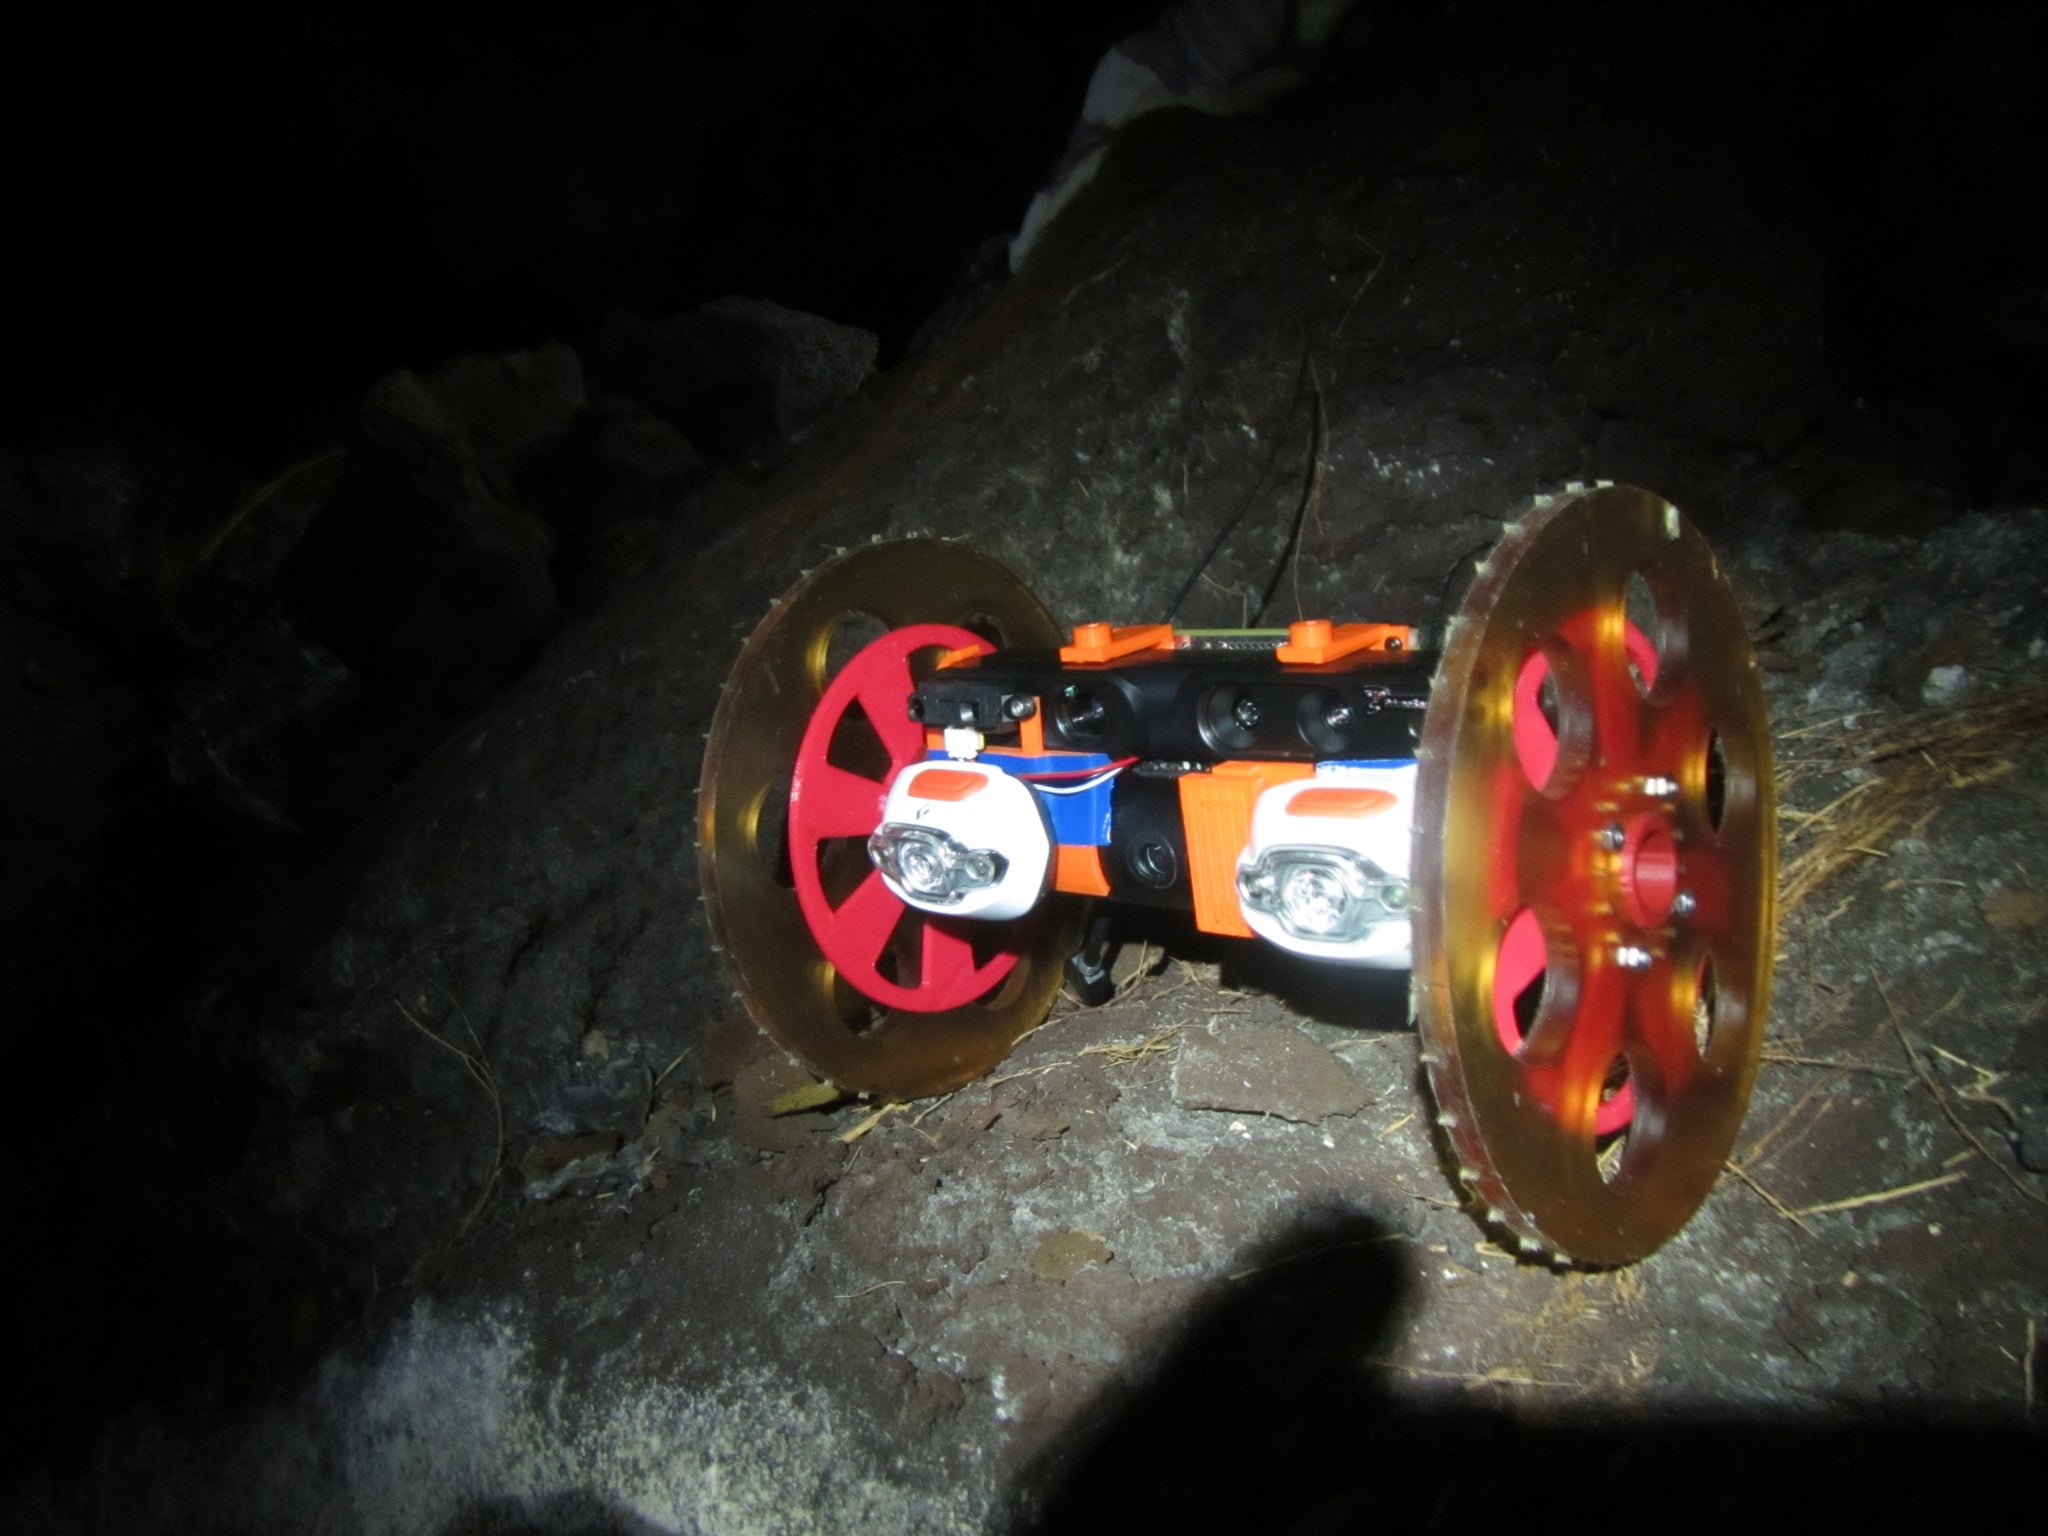 VolcanoBot 1, shown here in a lava tube — a structure formed by lava — explored the Kilauea volcano in Hawaii in May 2014. The robot is enabling researchers at NASA's Jet Propulsion Laboratory to put together a 3-D map of the fissure